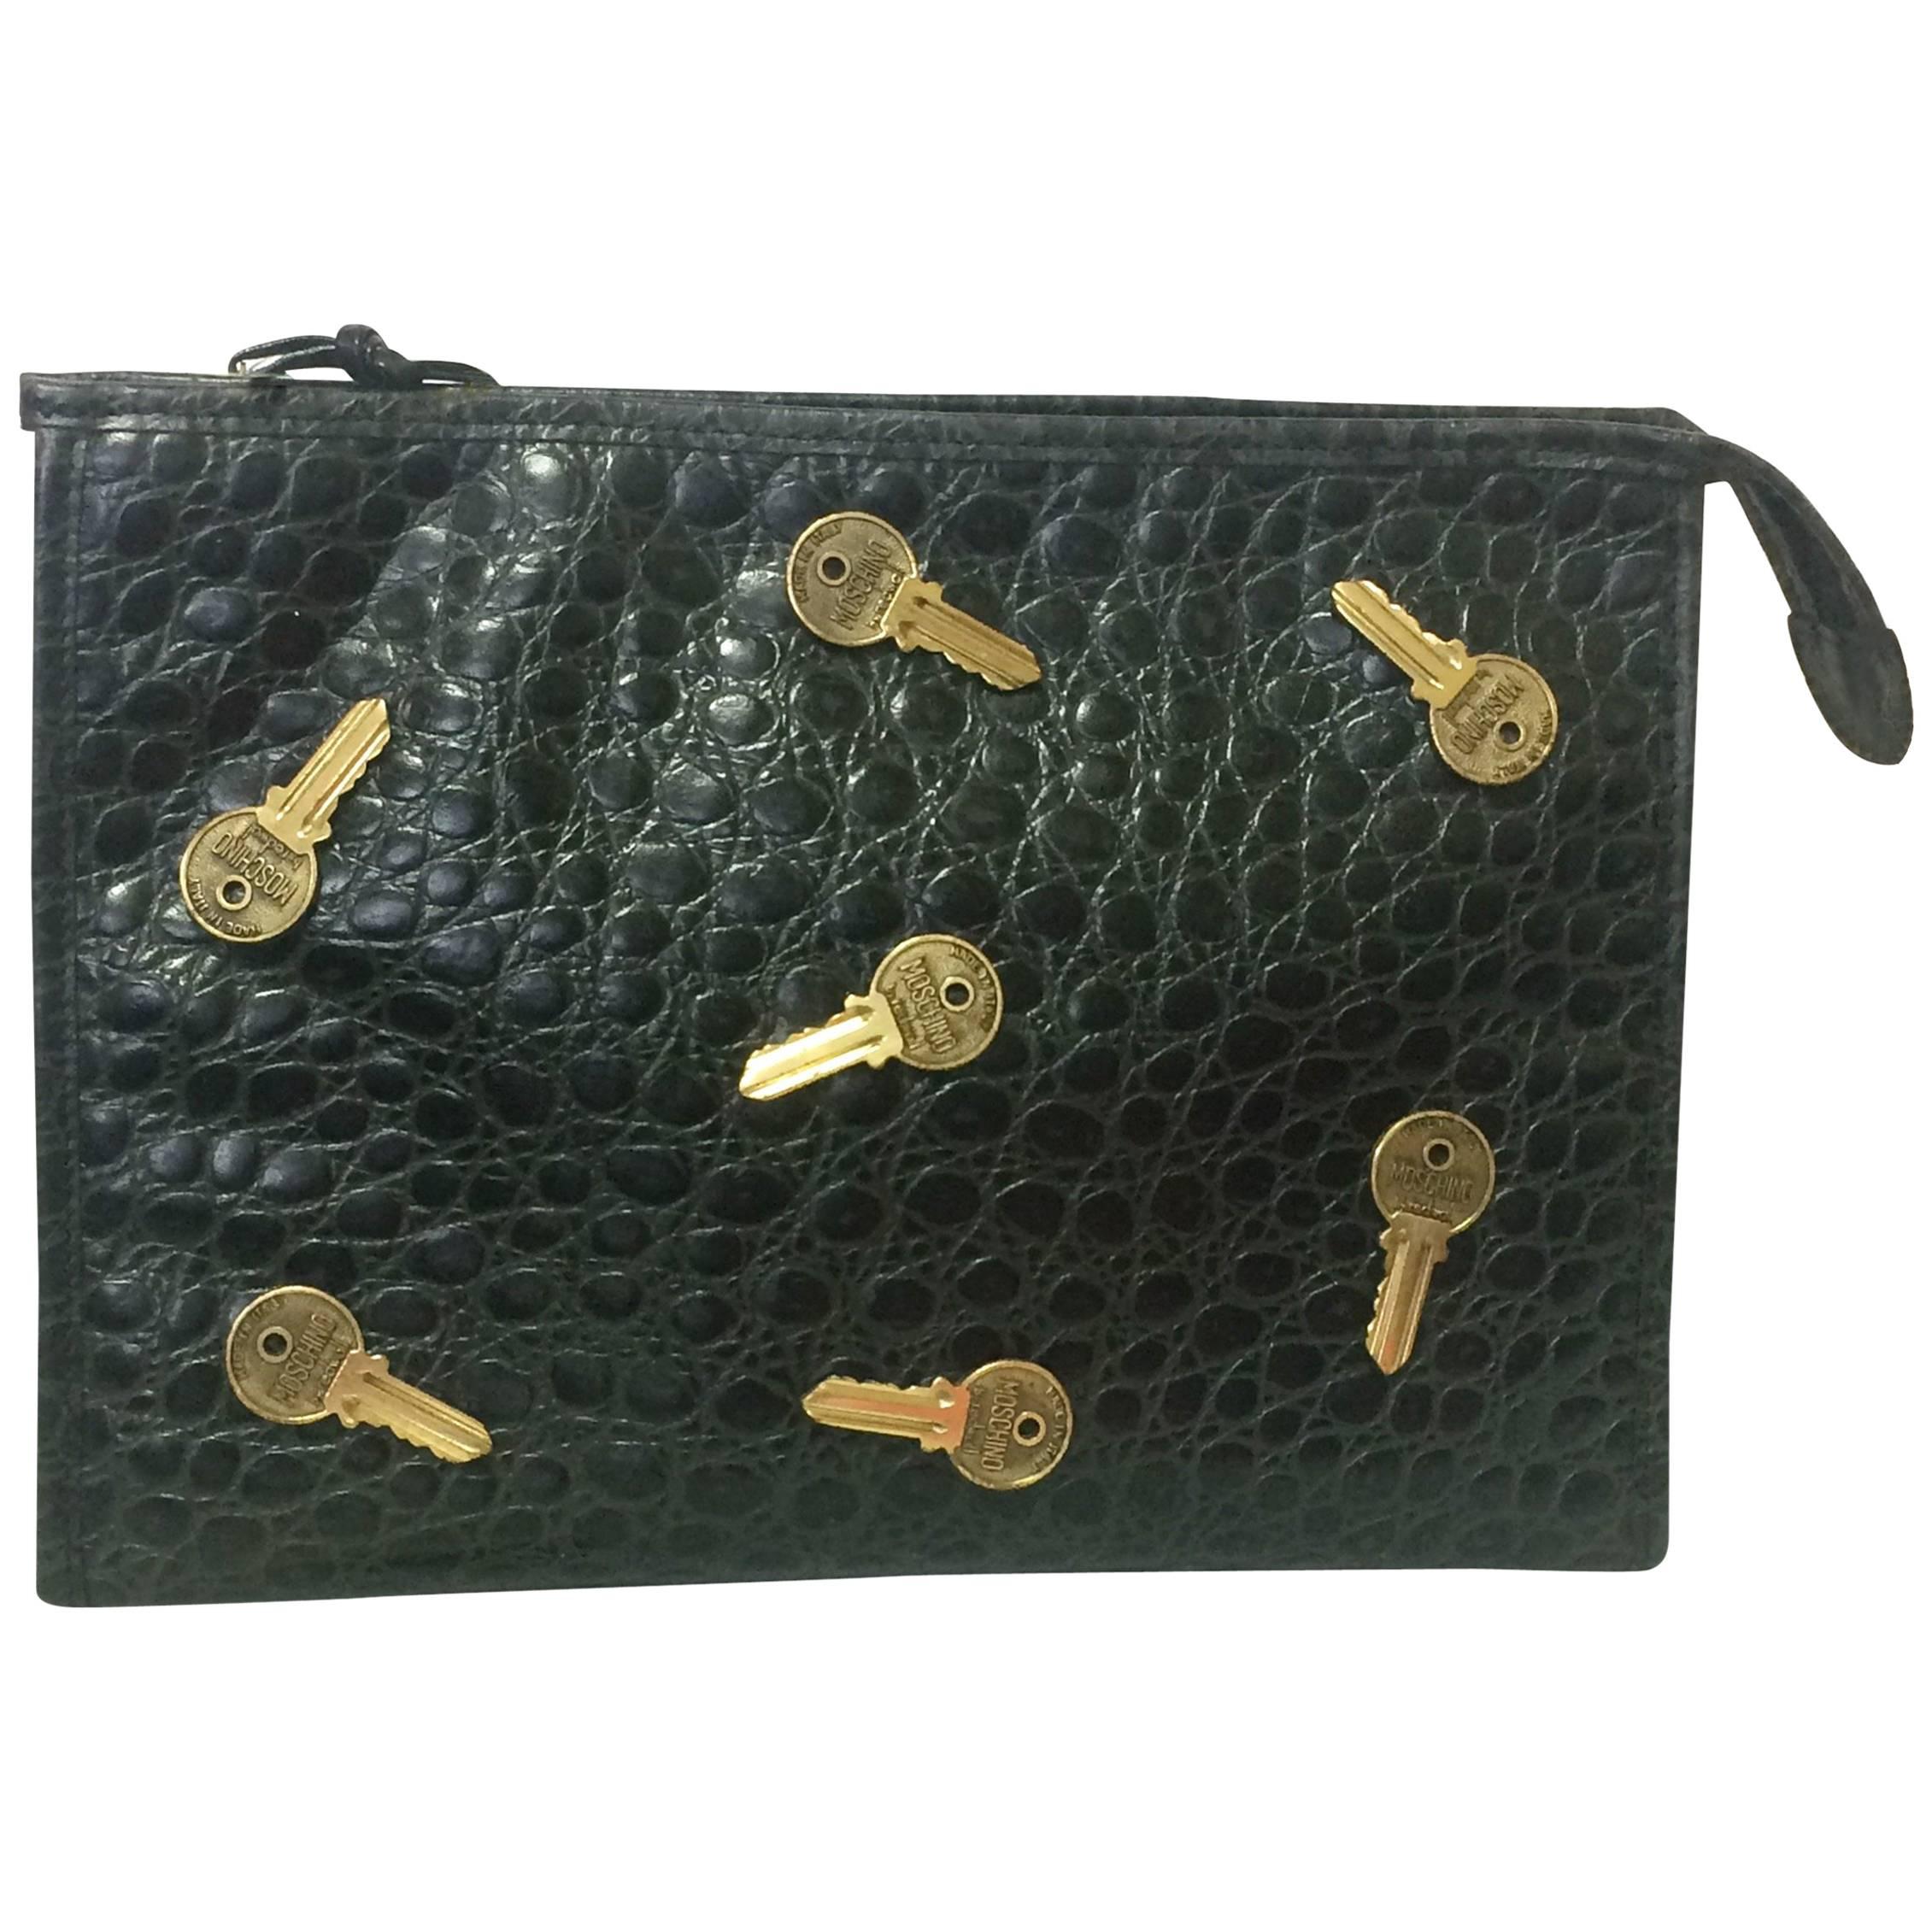 Vintage MOSCHINO classic croc-embossed black leather clutch bag with key logo